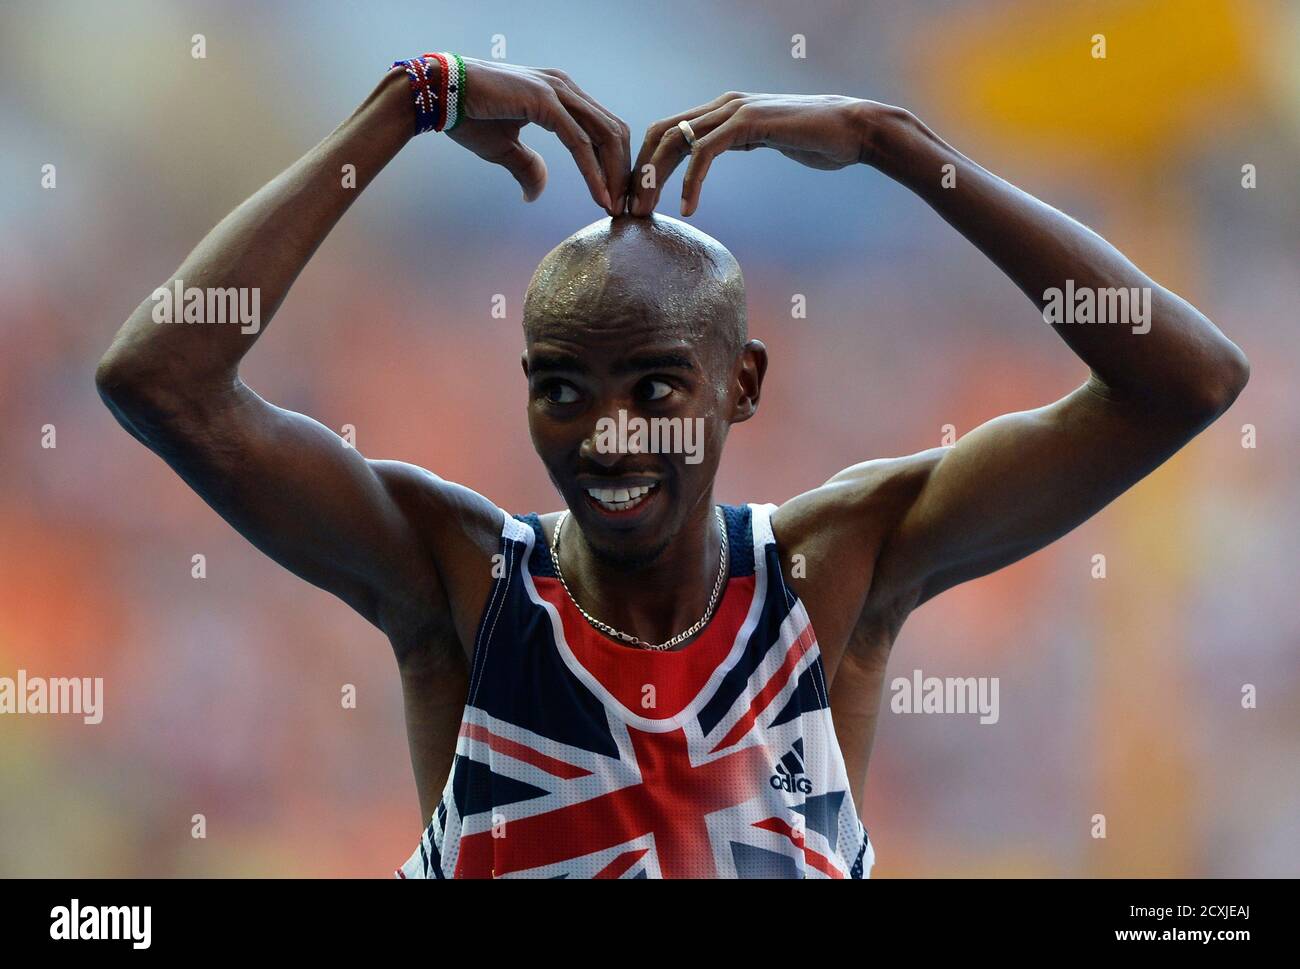 Mo Farah of Britian makes the 'Mobot' pose as he celebrates winning the  men's 10,000 metres final during the IAAF World Athletics Championships at  the Luzhniki stadium in Moscow August 10, 2013.